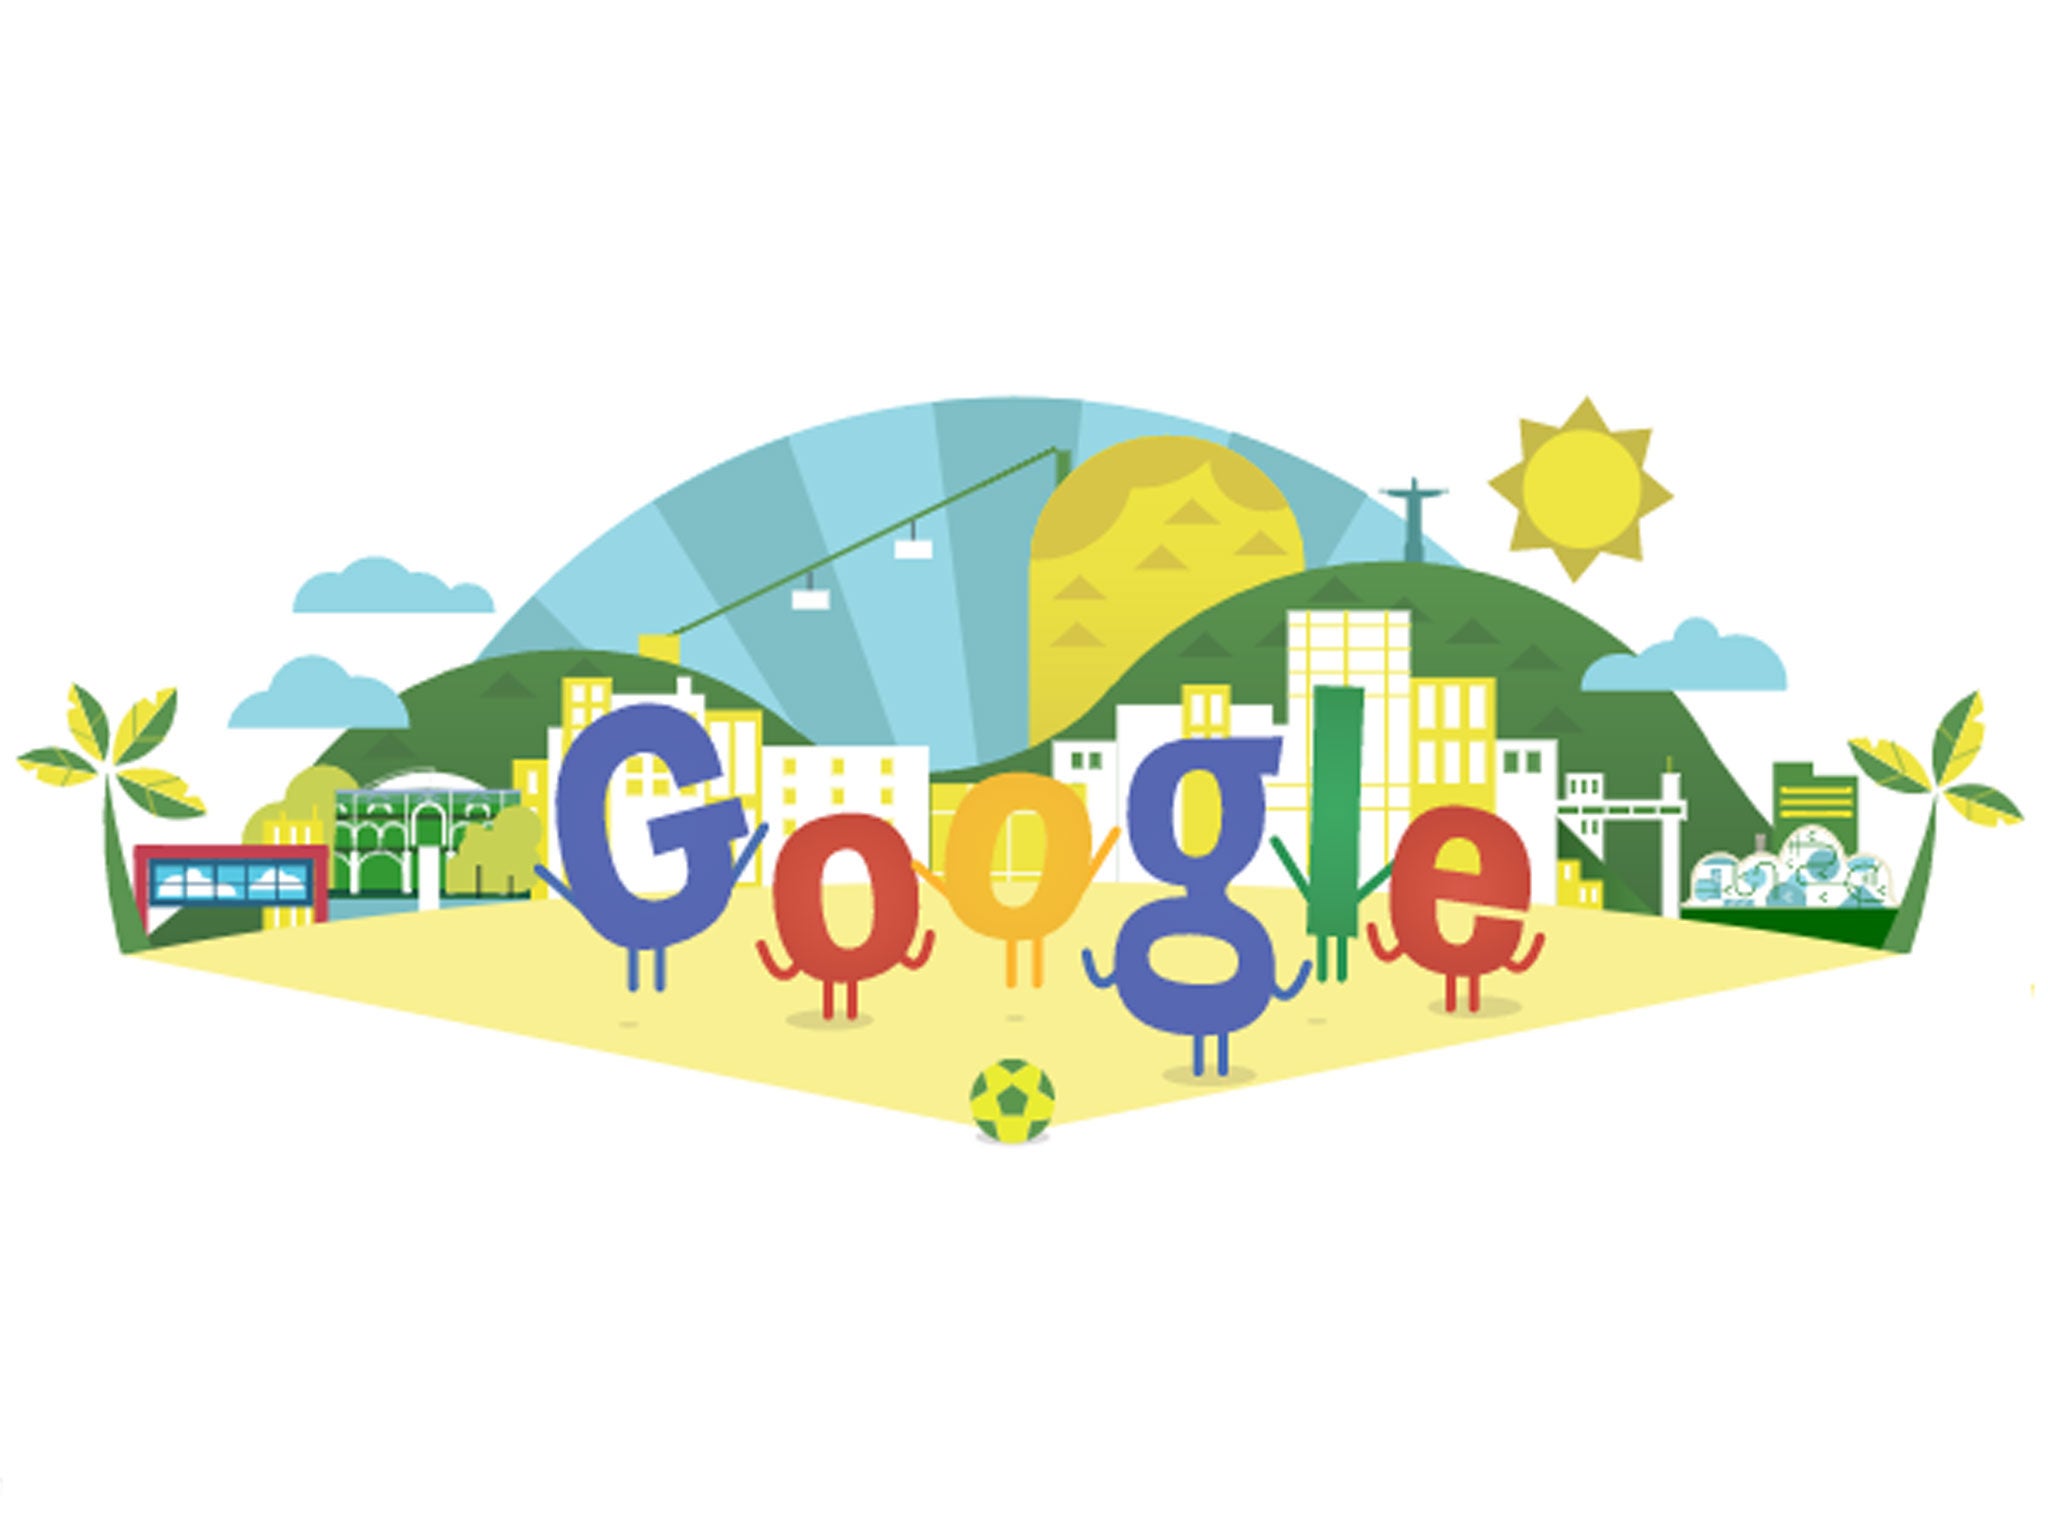 A global Google Doodle released on 12 June 2014, to celebrate the start of the FIFA 2014 World Cup in Brazil